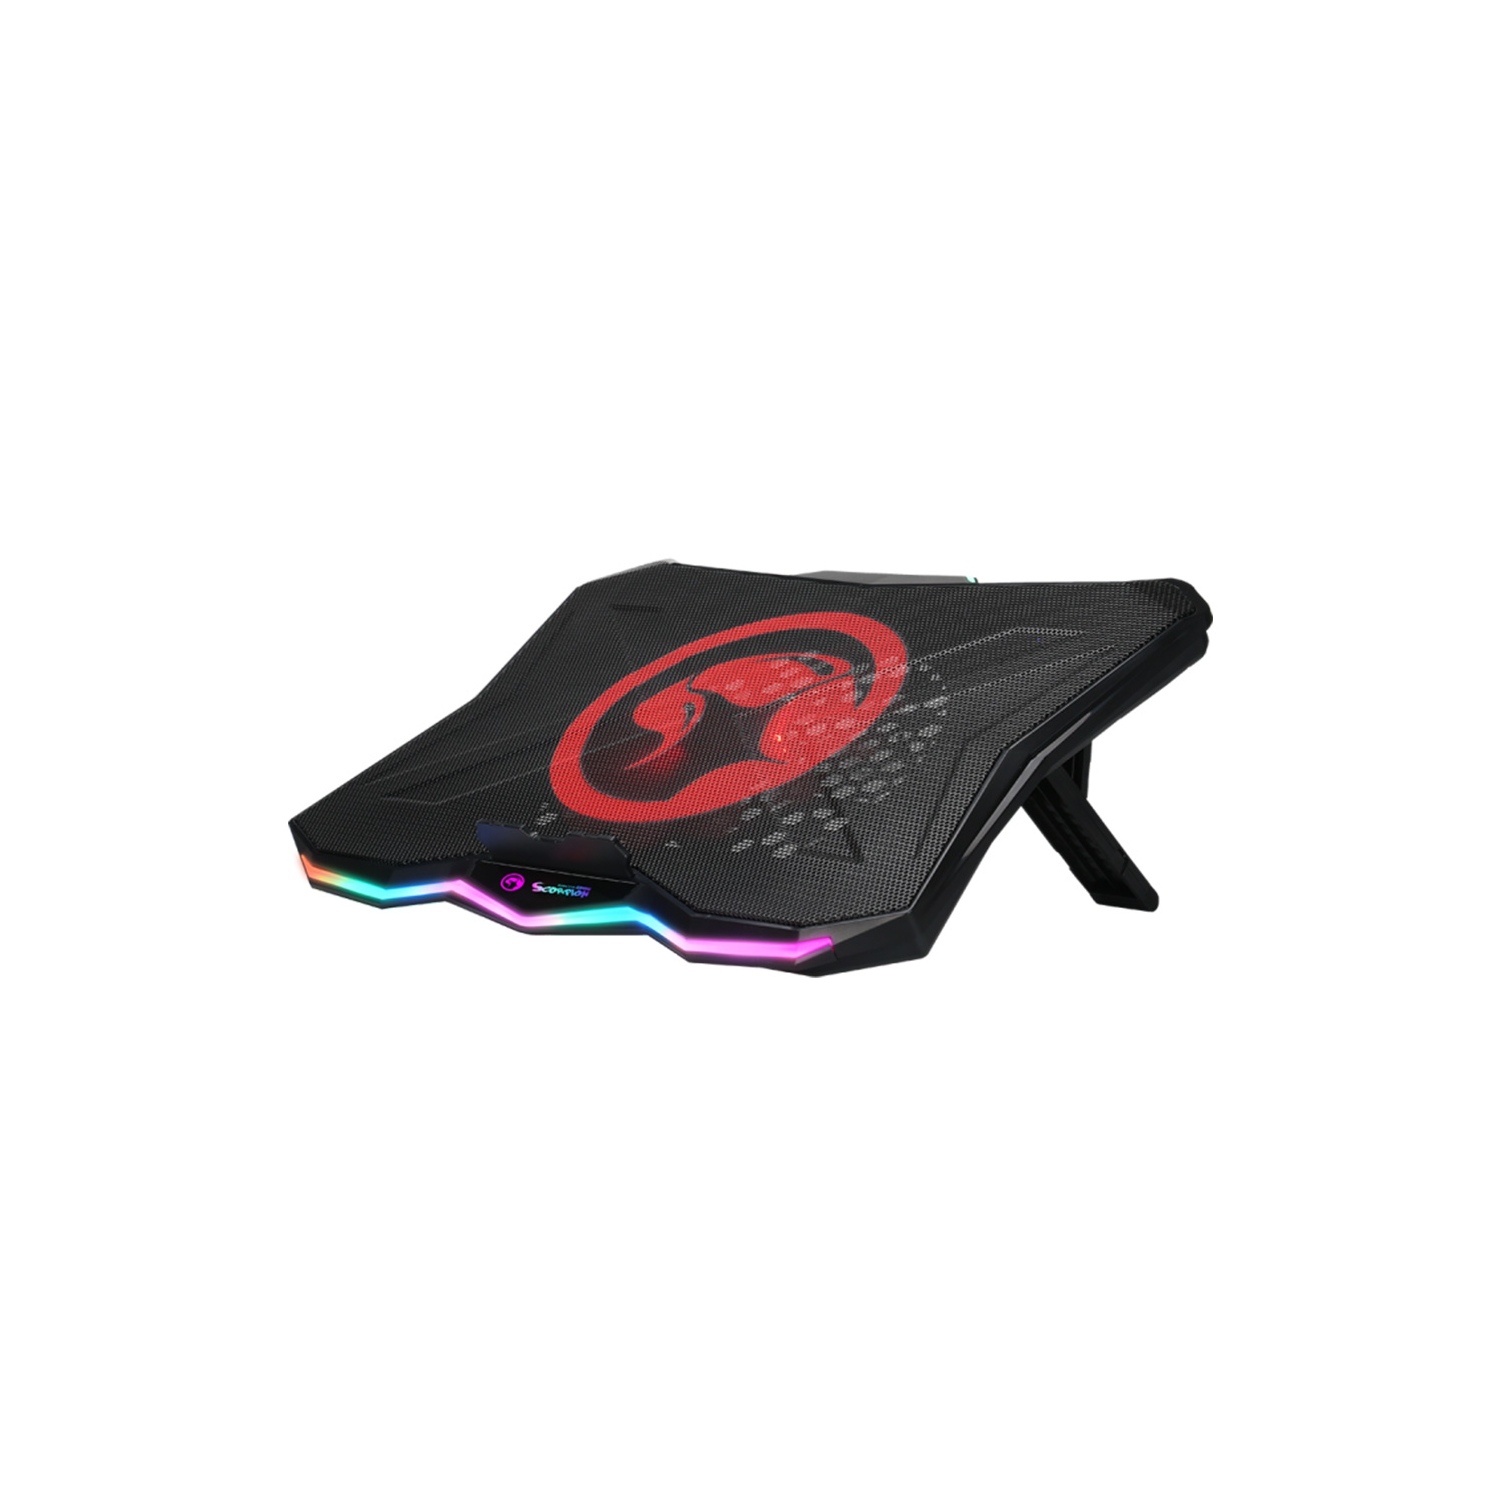 Marvo RGB lighting Laptop Cooler Cooling Pad, Supports Up To 17 inch laptop